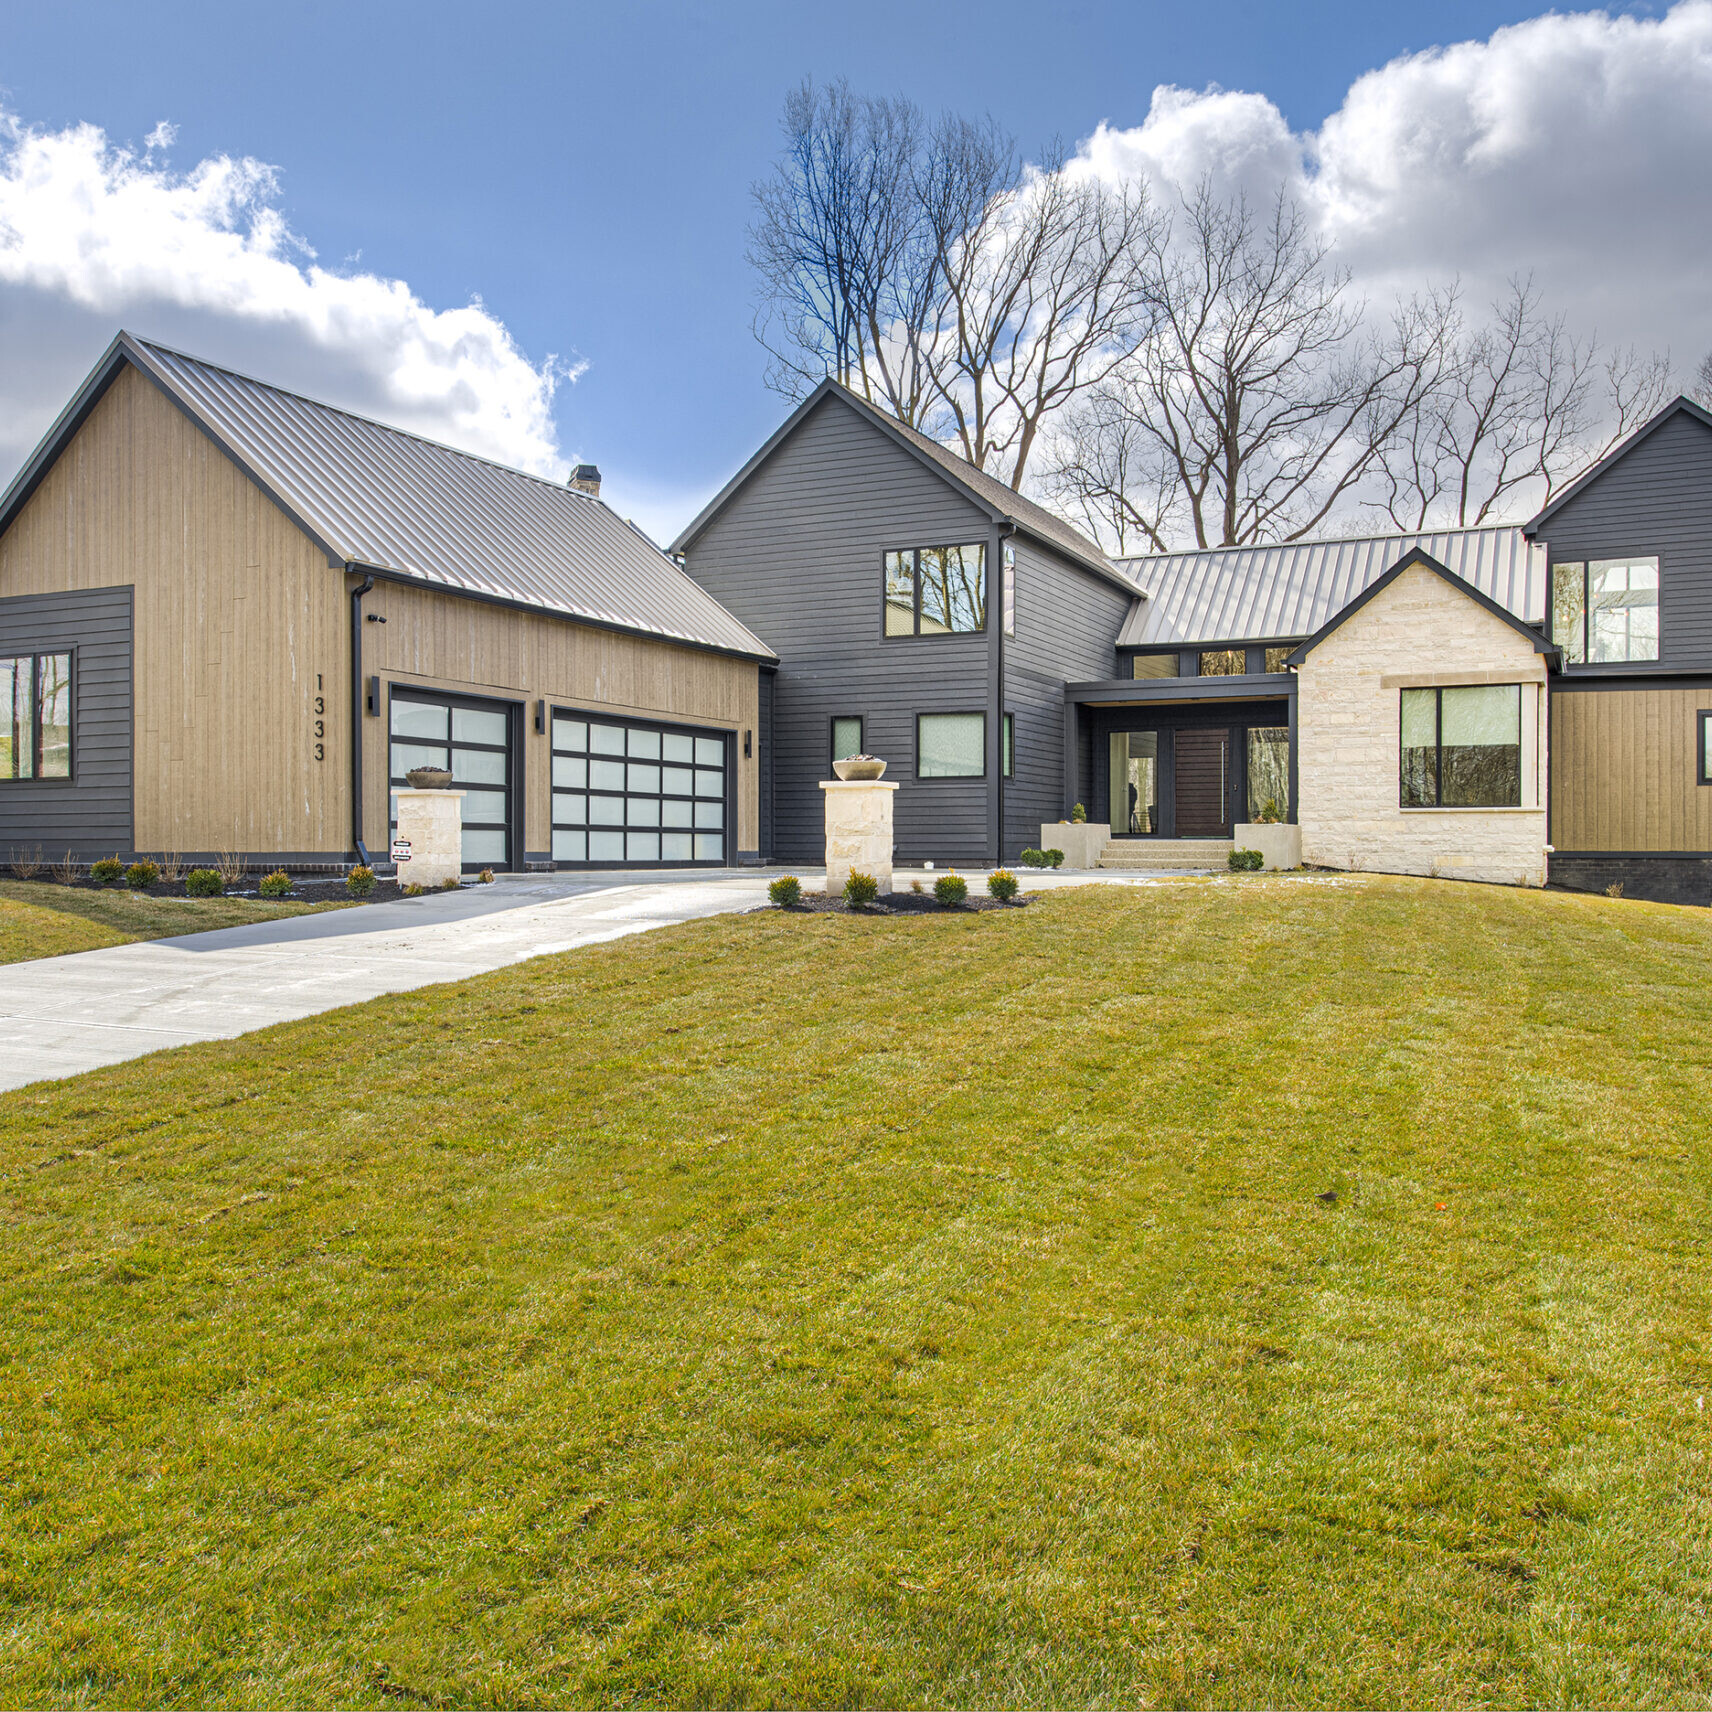 A black and gray home with a grassy yard.